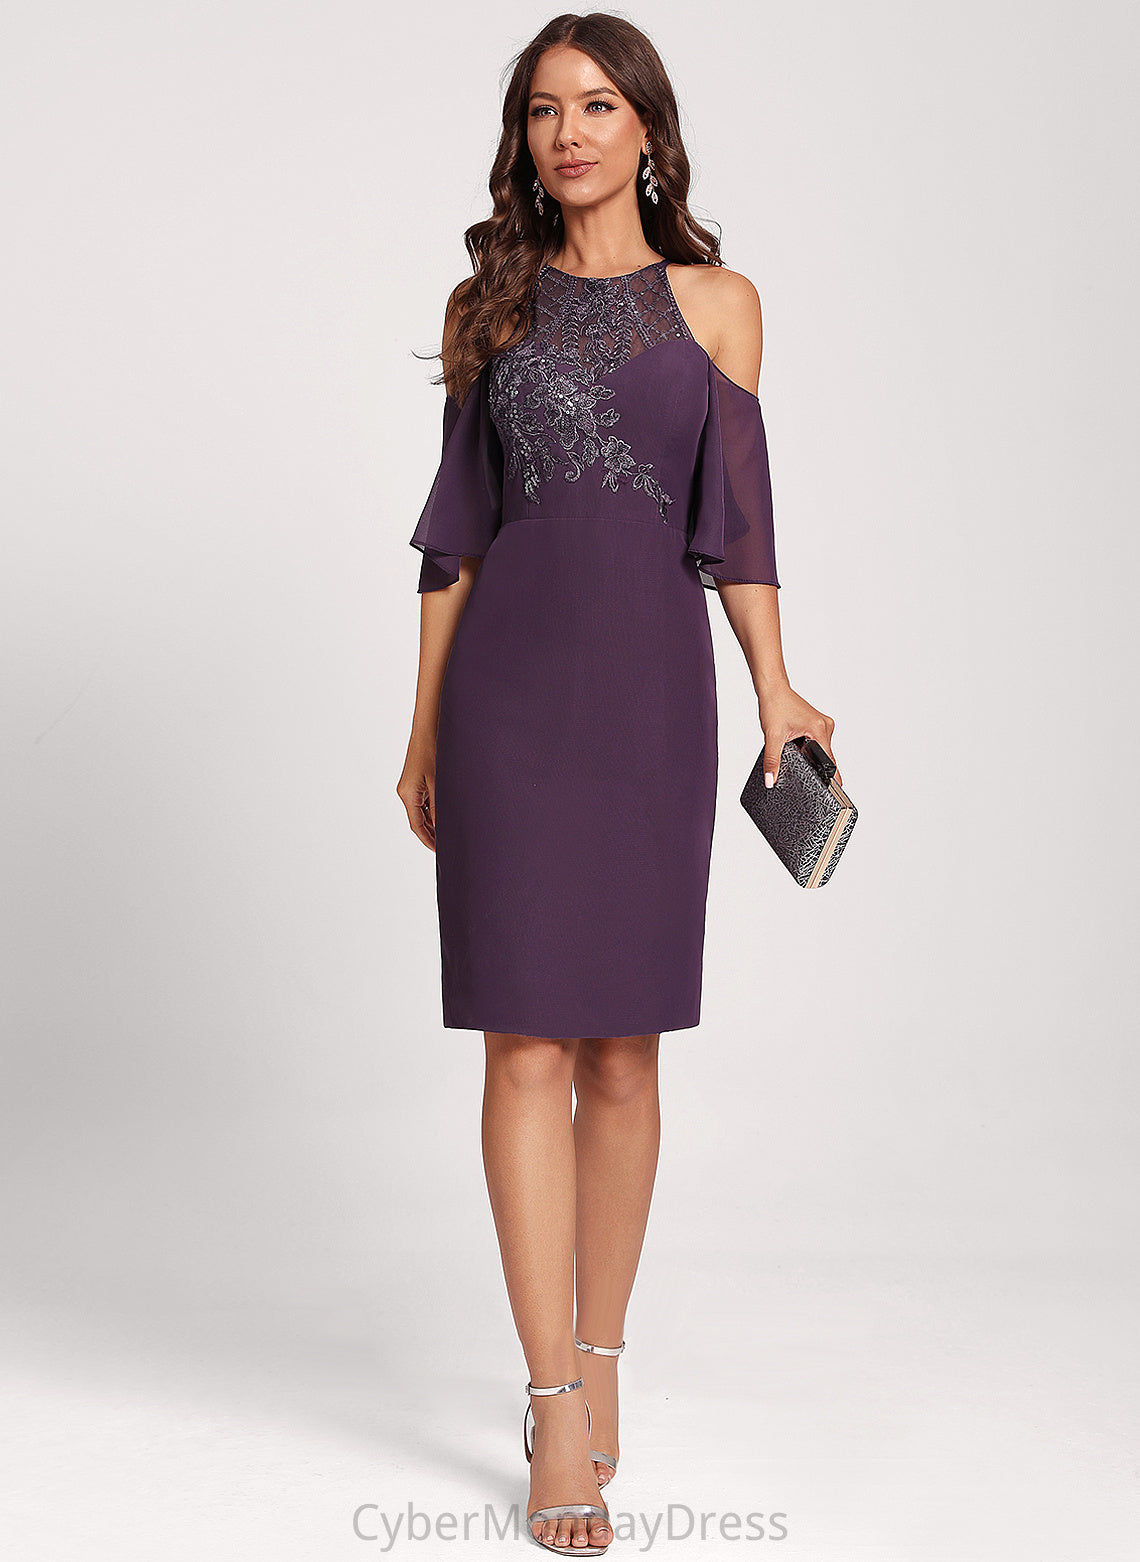 With Chiffon Knee-Length Shoulder Sequins Lace Club Dresses Cocktail Sheath/Column Peggie Cold Dress